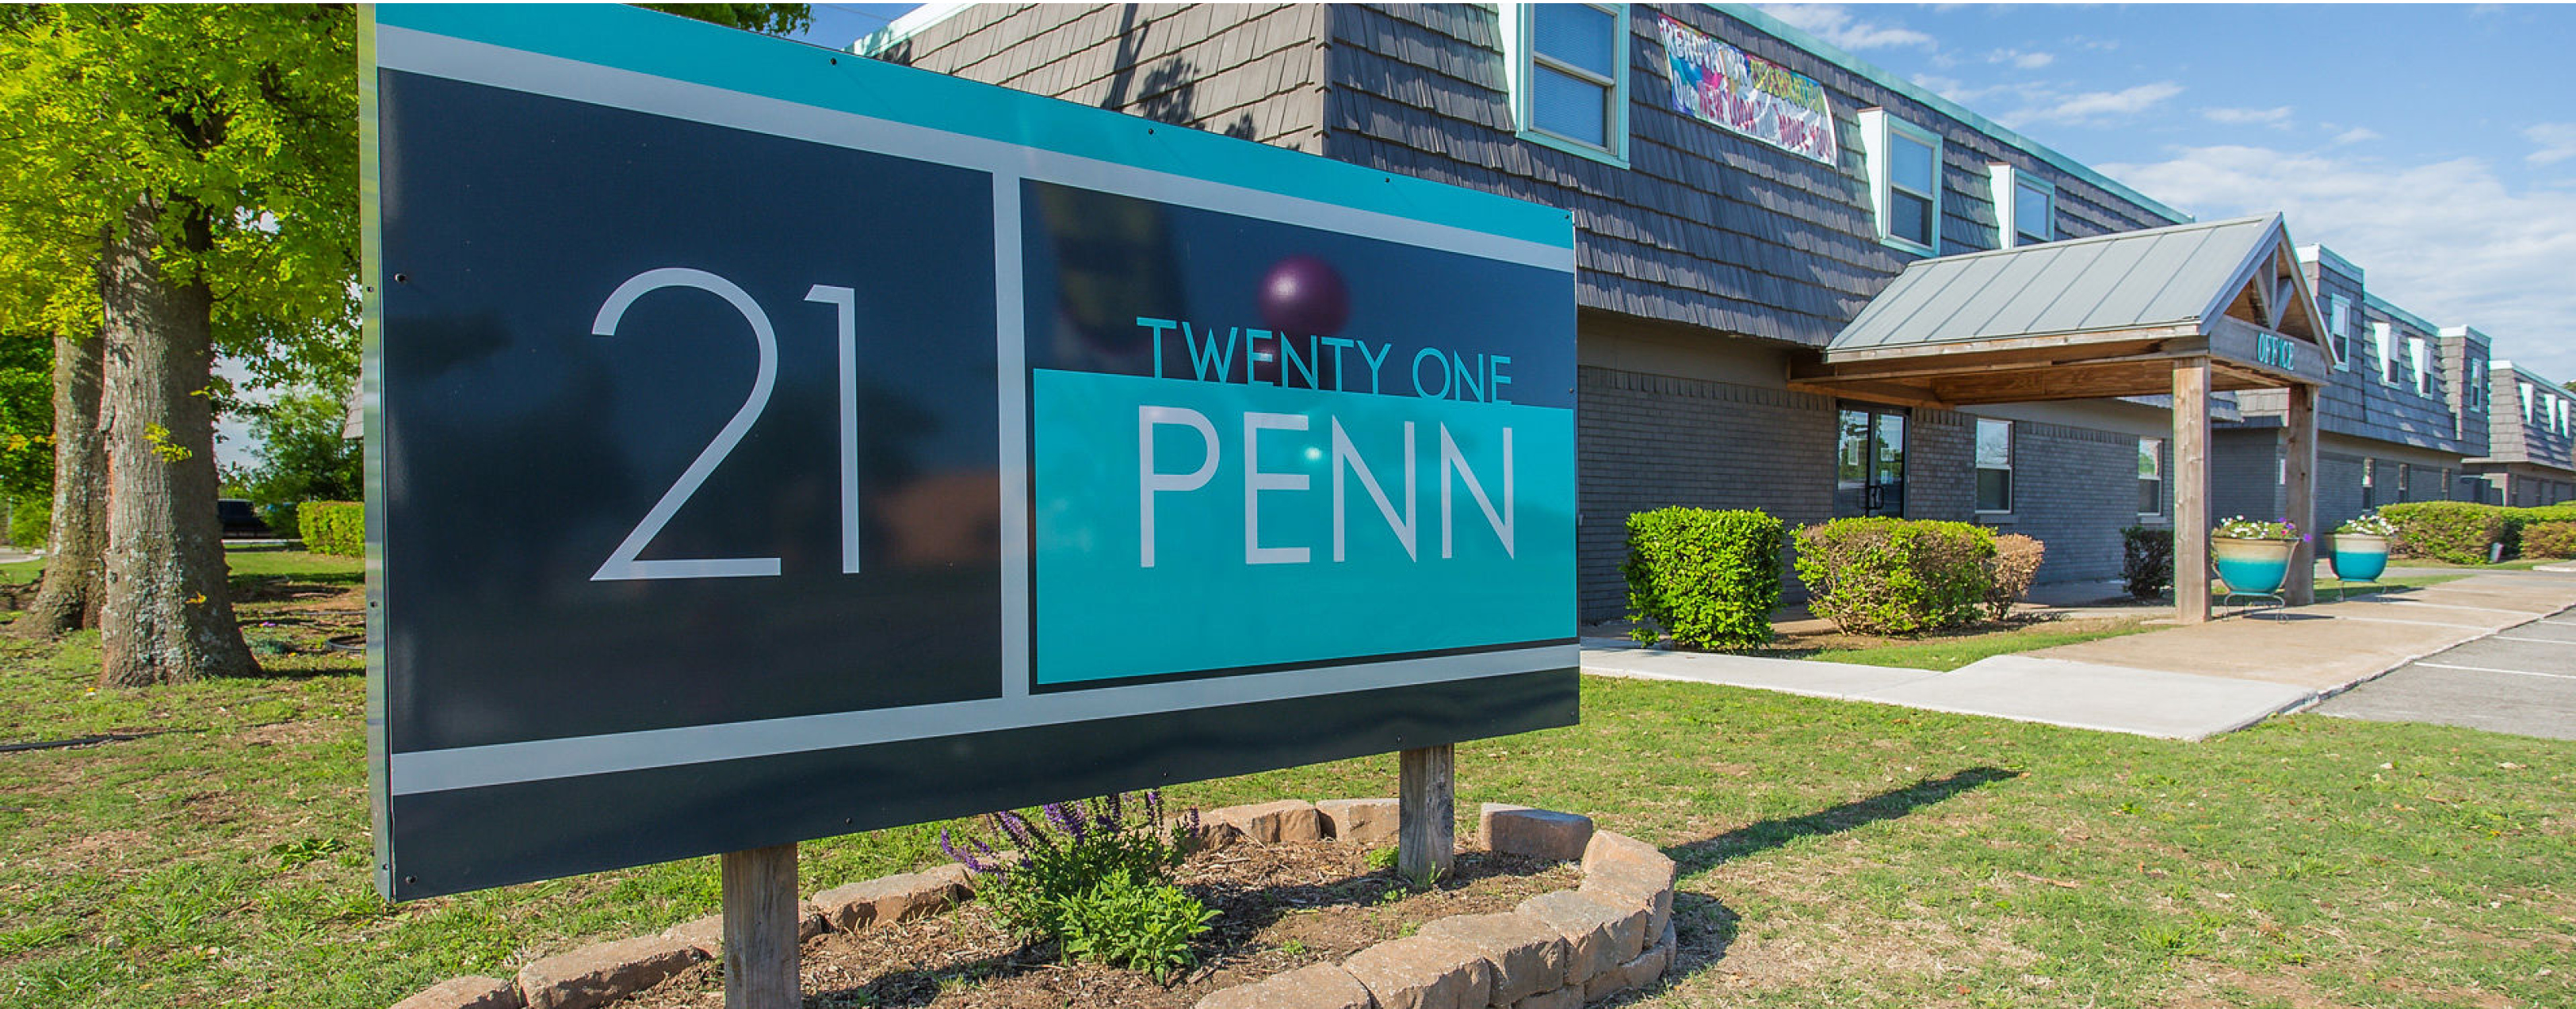 Signage for 21 Penn apartments with a building to the right.